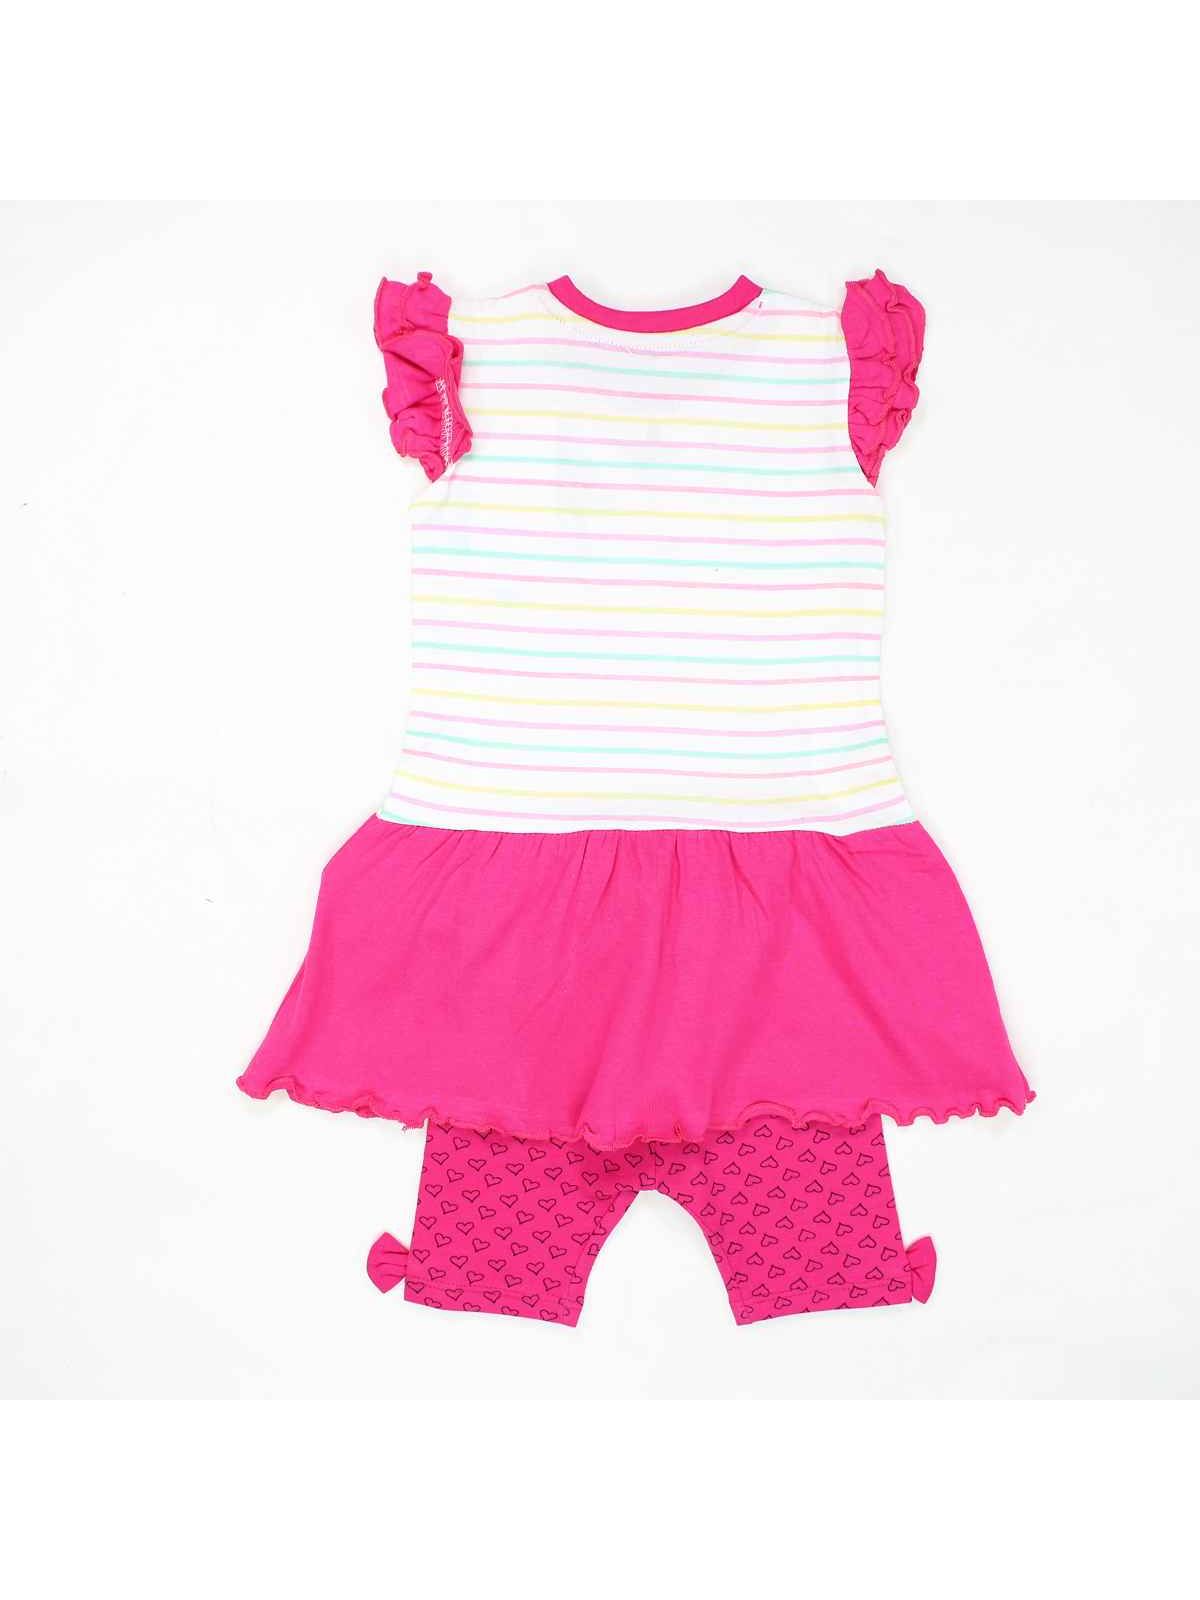 Titi Clothing of 2 pieces with hanger